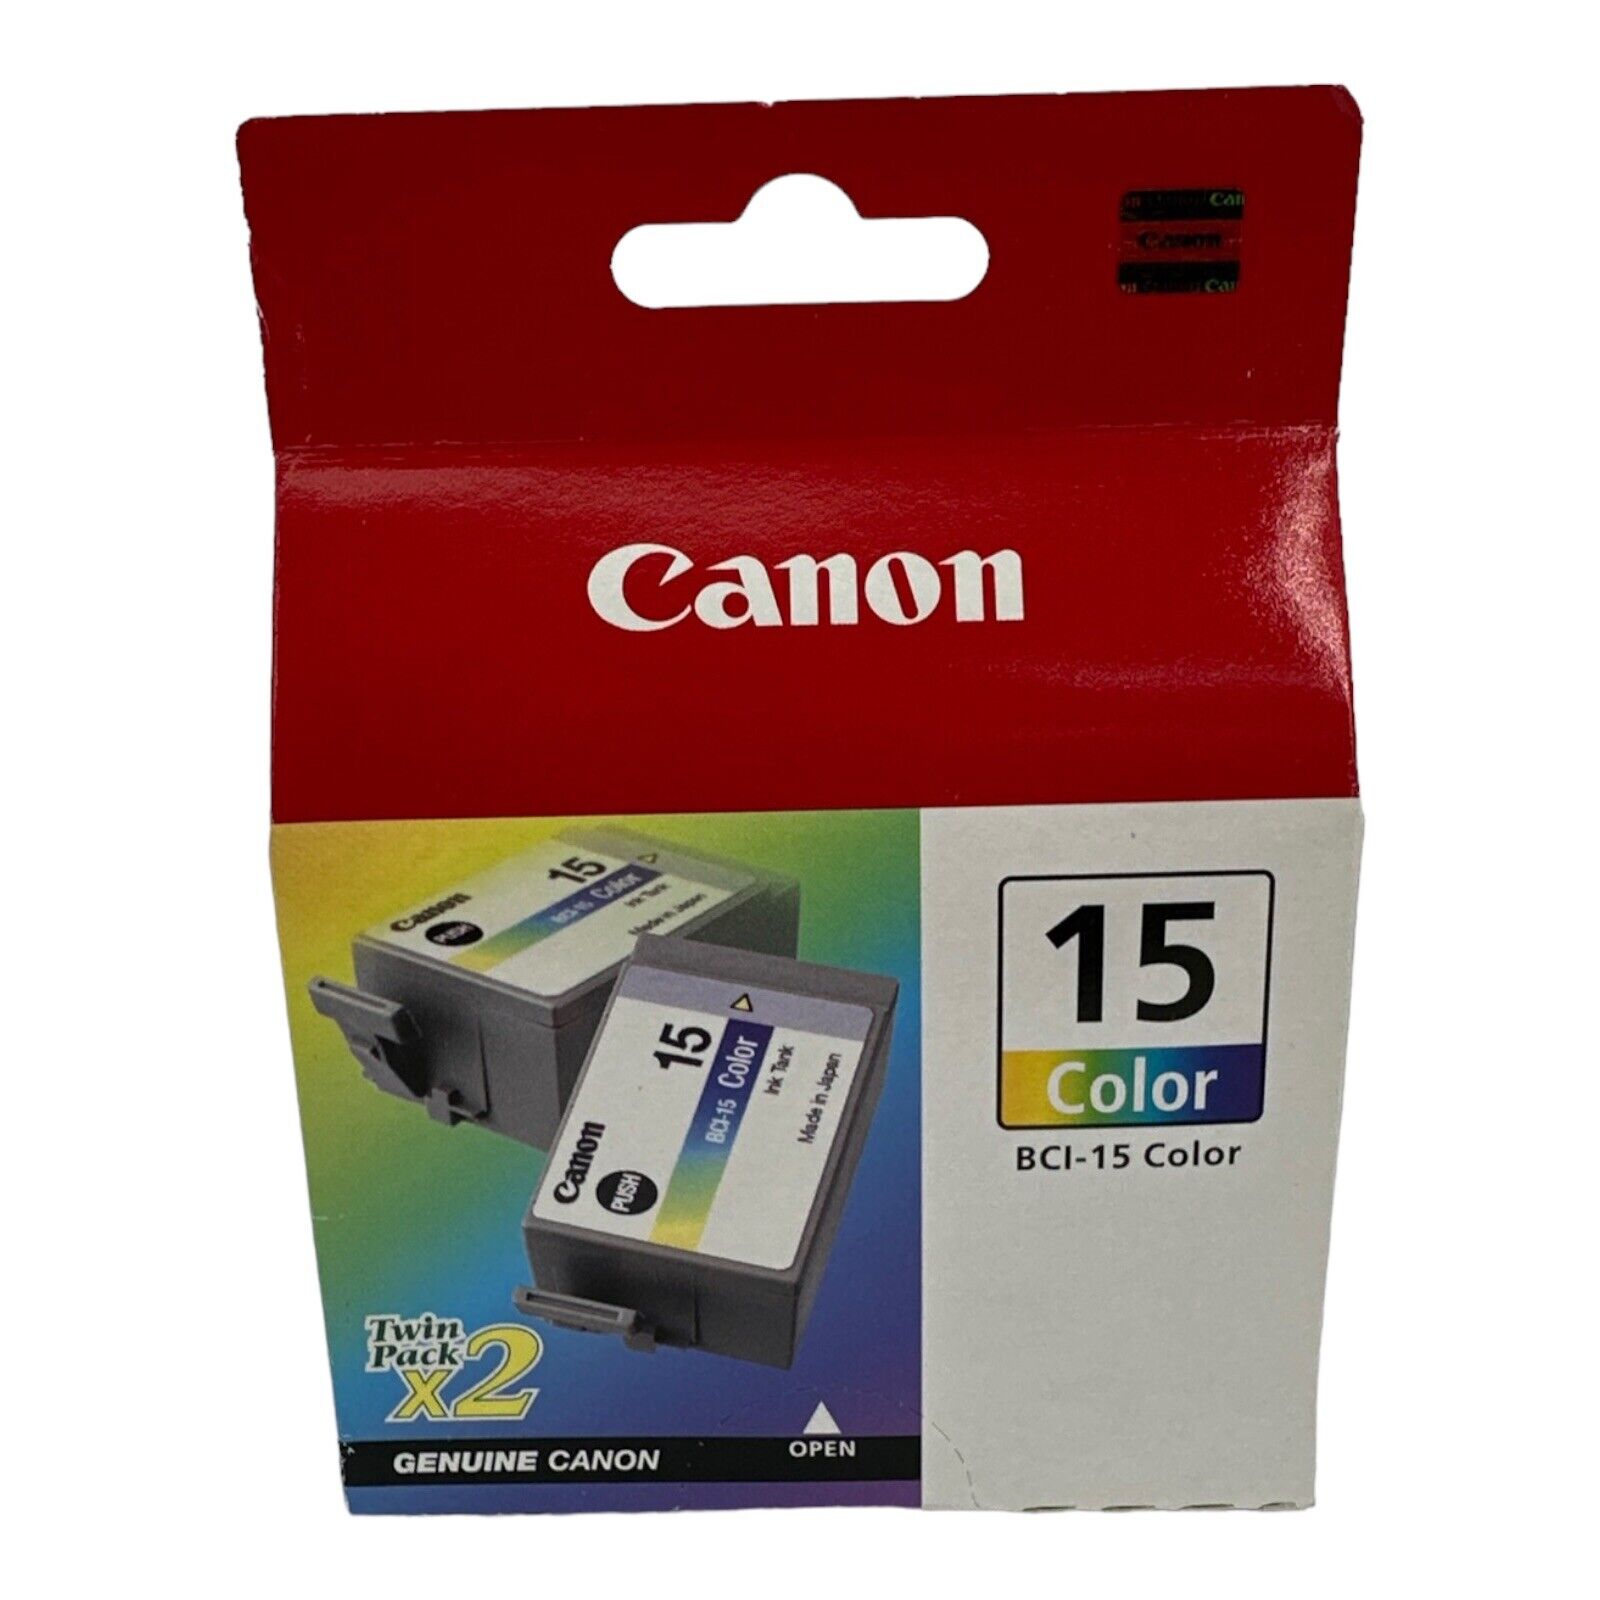 Genuine Canon 15 Color Ink Cartridge 2 Pack BCI-15 Color Twin Pack